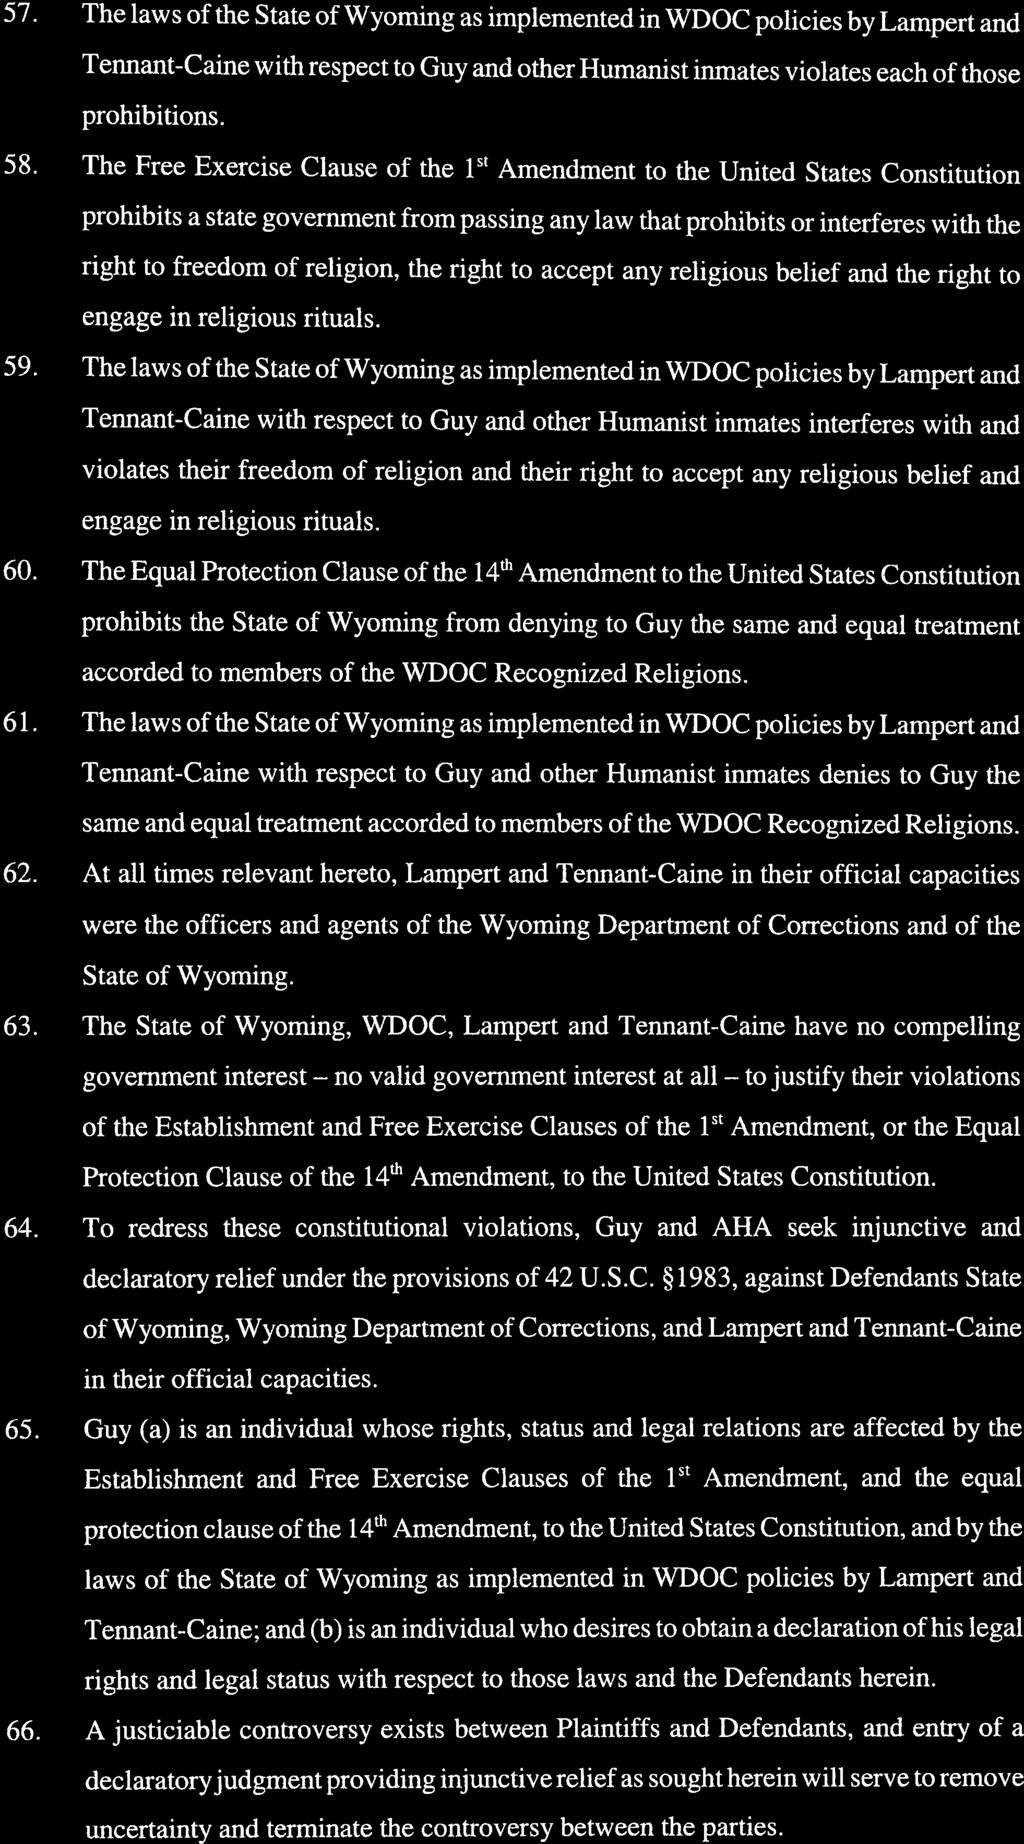 to 57. The laws of the State of Wyoming as implemented in WDOC policies bylampert and Tennant-Caine with respect to Guy and other Humanist inmates violates each of those prohibitions. 58.